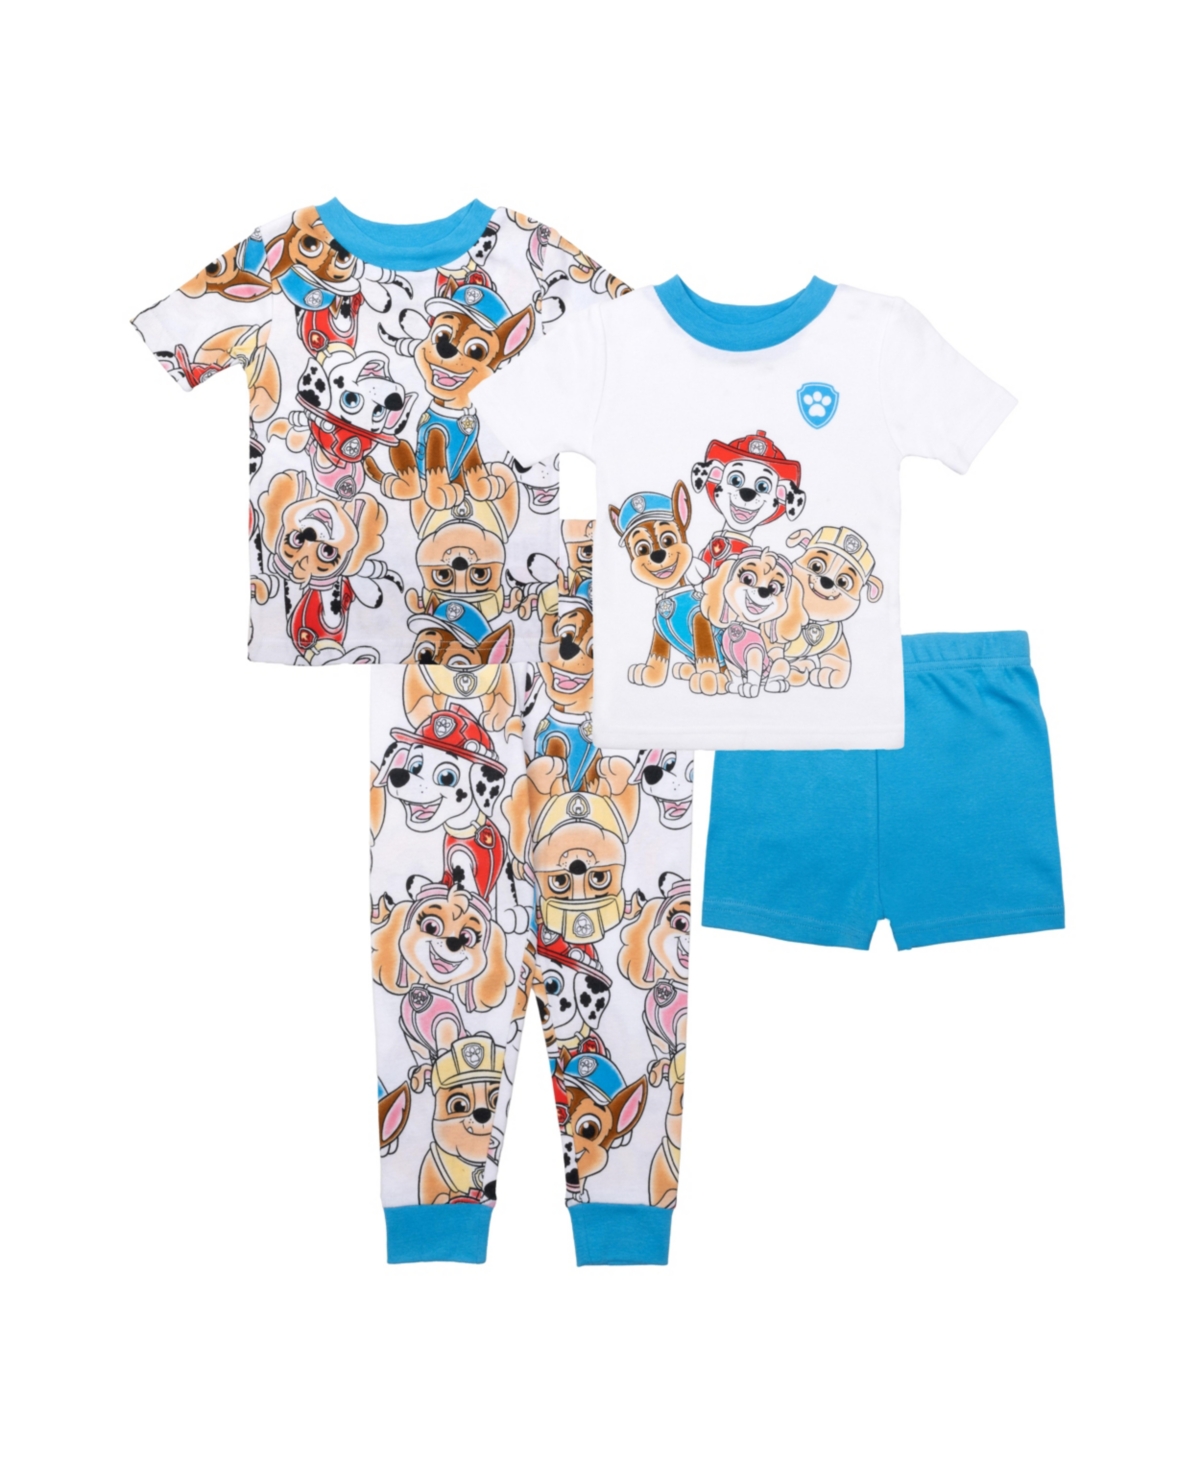 Shop Paw Patrol Toddler Boys Top And Pajama, 4 Piece Set In Assorted